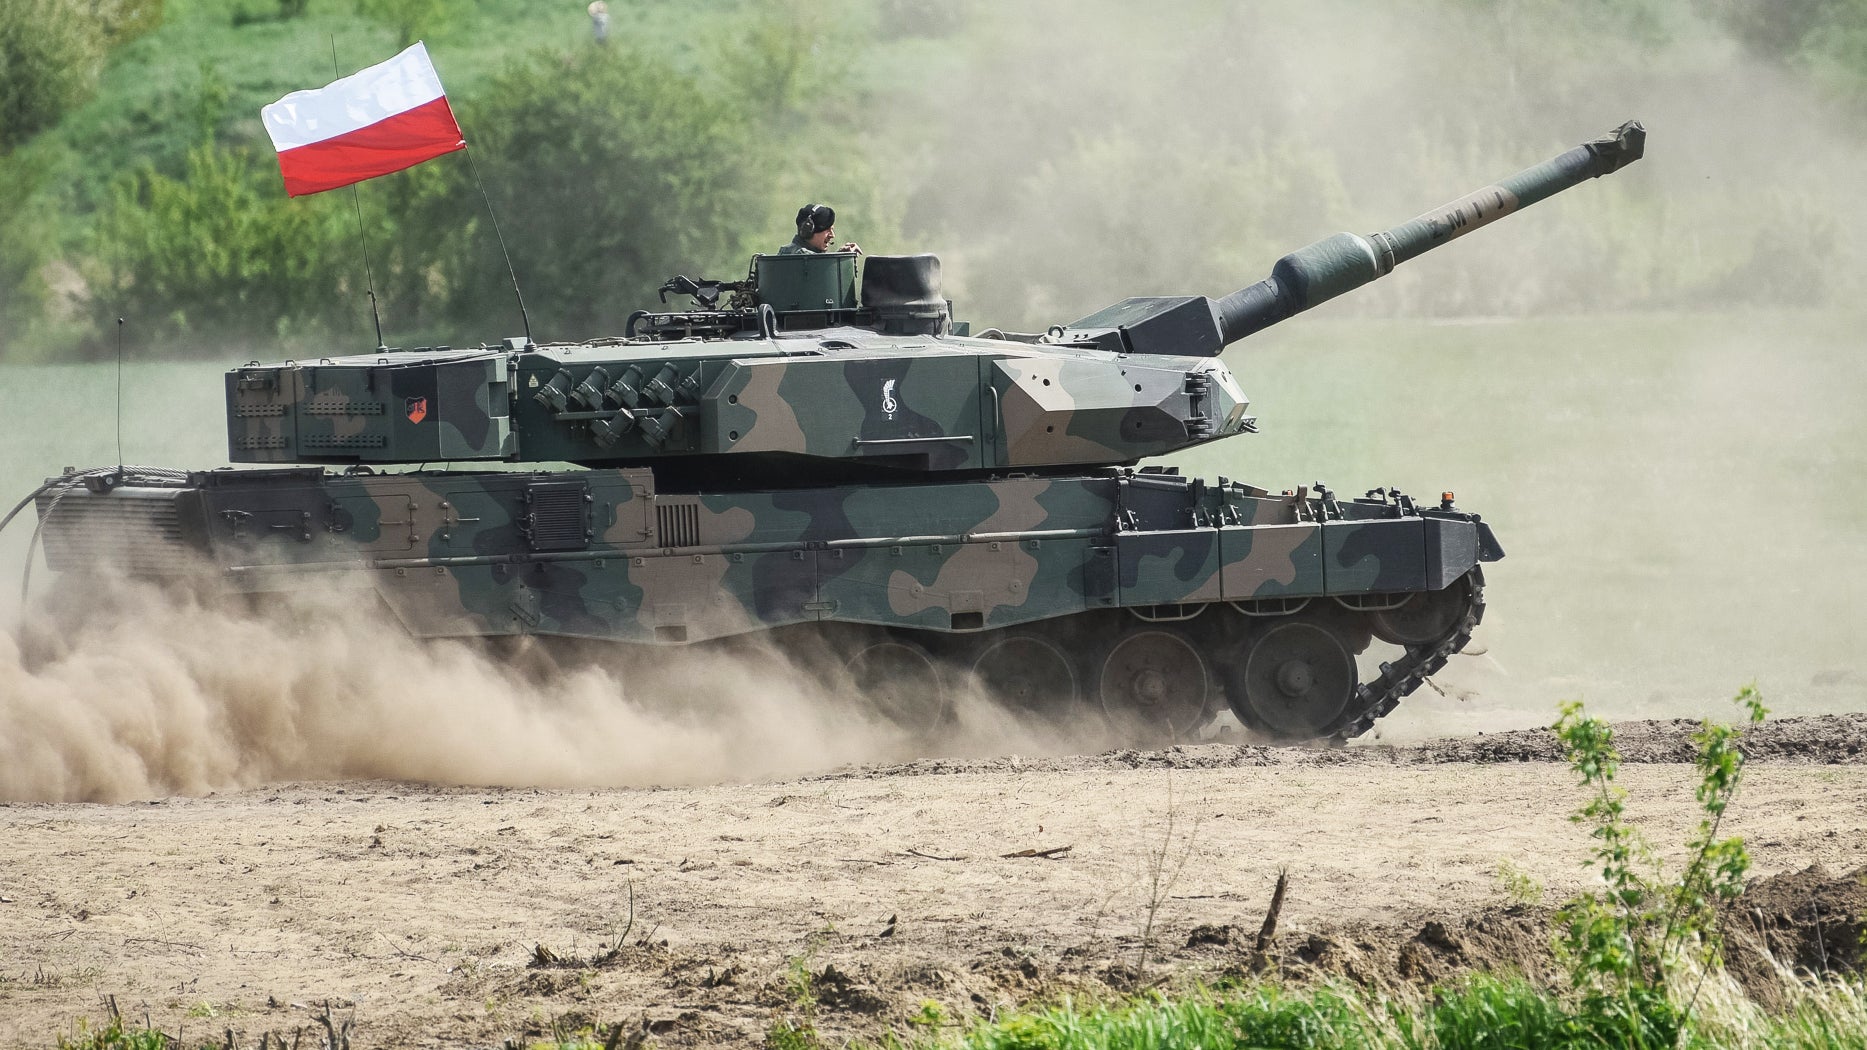 Poland reveals when it will hand over the second batch of Leopard 2 tanks to Ukraine